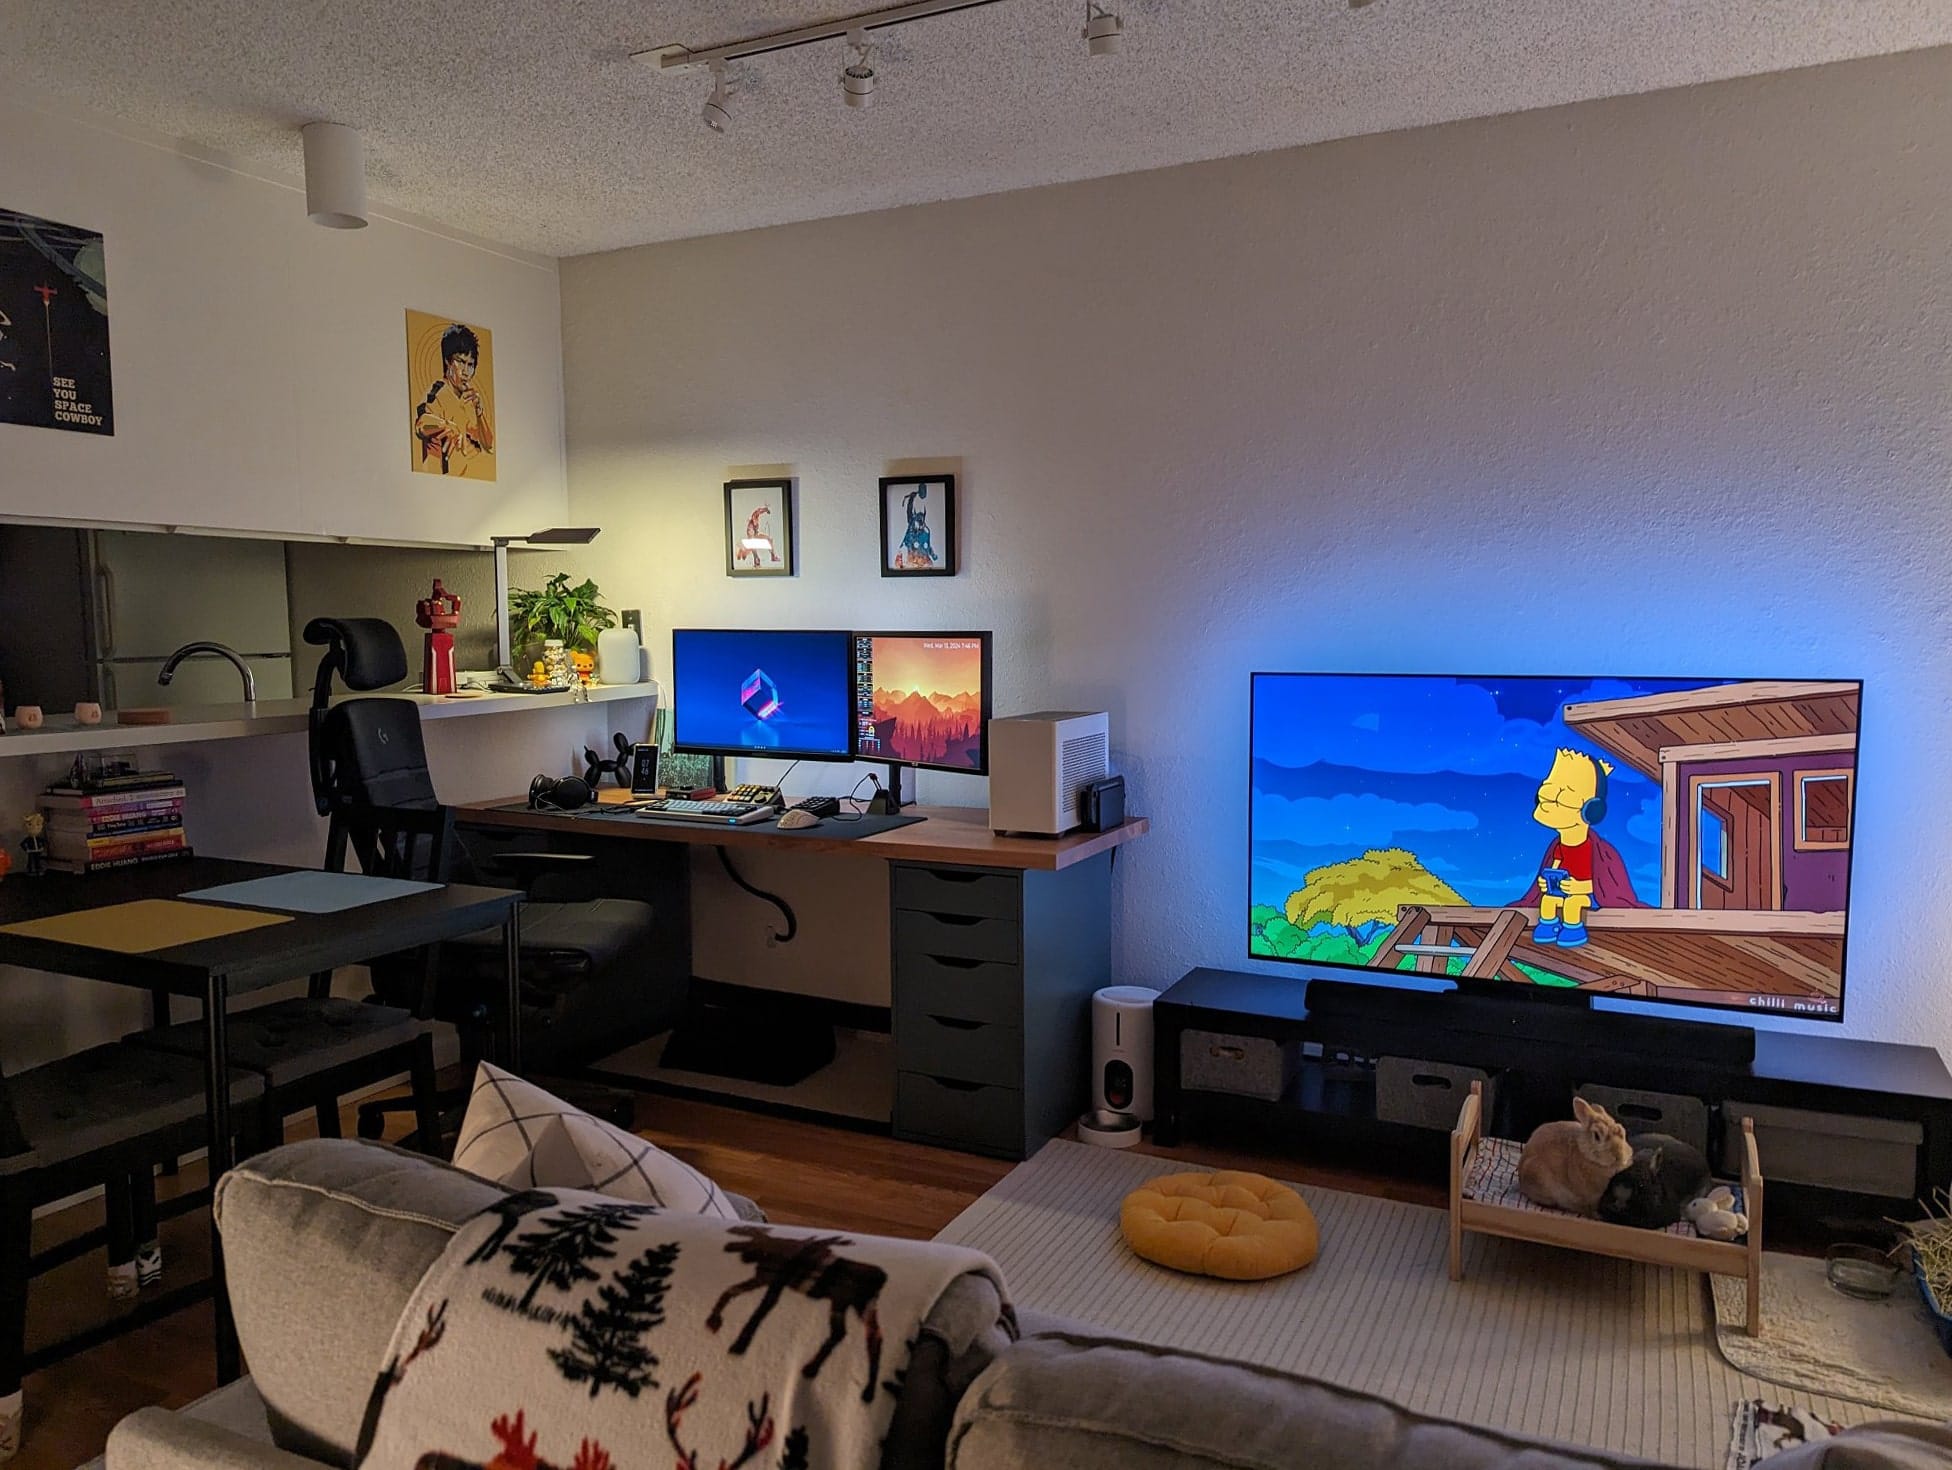  A living room featuring a large TV showing the Simpsons series, a comfortable sofa with a patterned throw, and an office area with dual monitors and desk in the corner